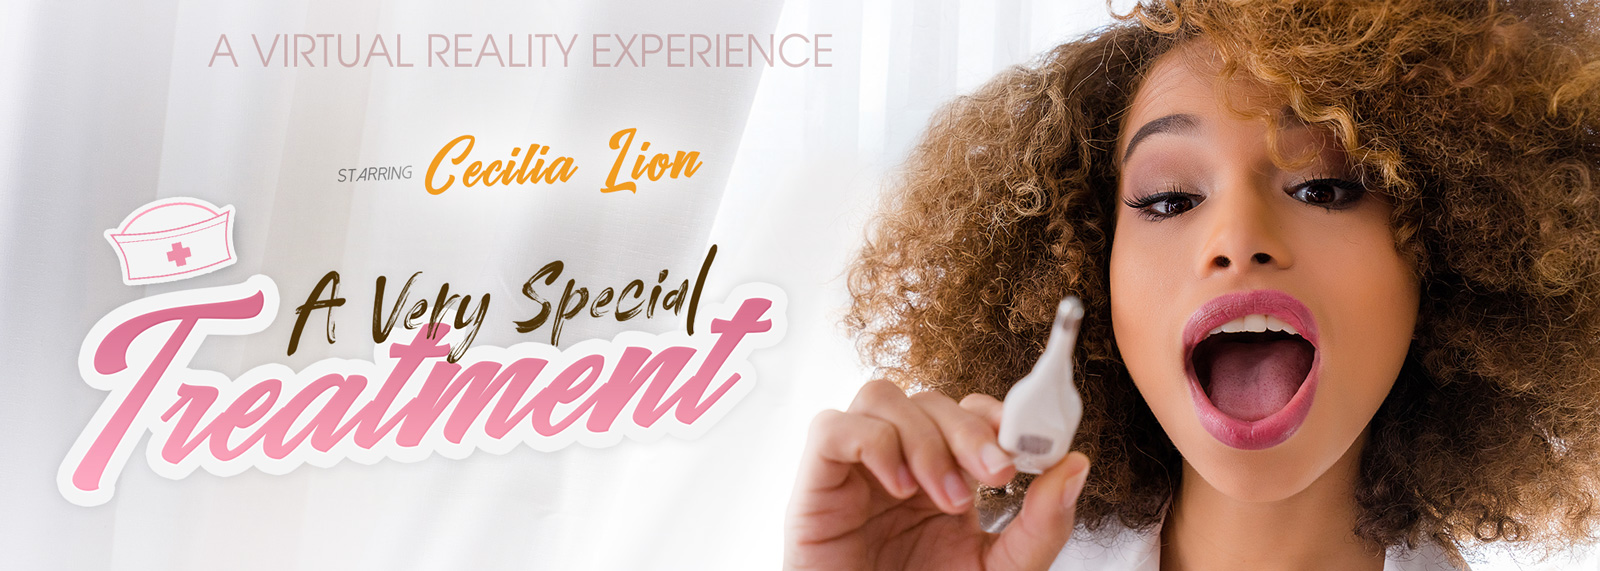 A Very Special Treatment - VR Porn Video, Starring: Cecilia Lion